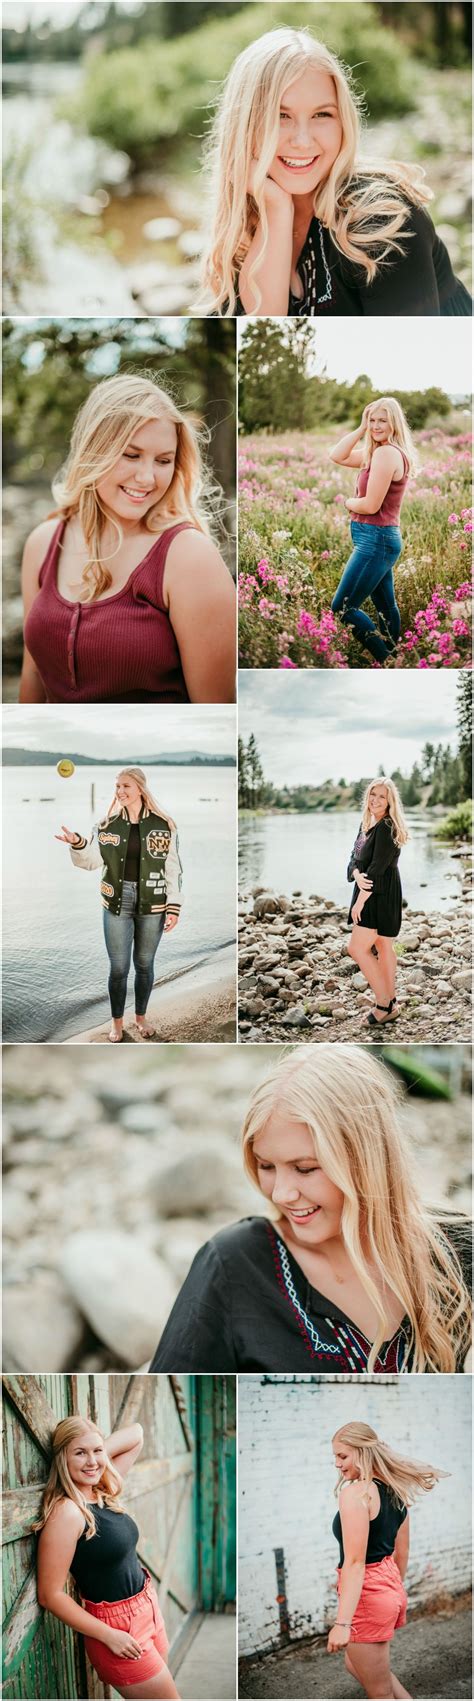 Beautiful Blonde Haired Summer Senior By The River Near Flowers And